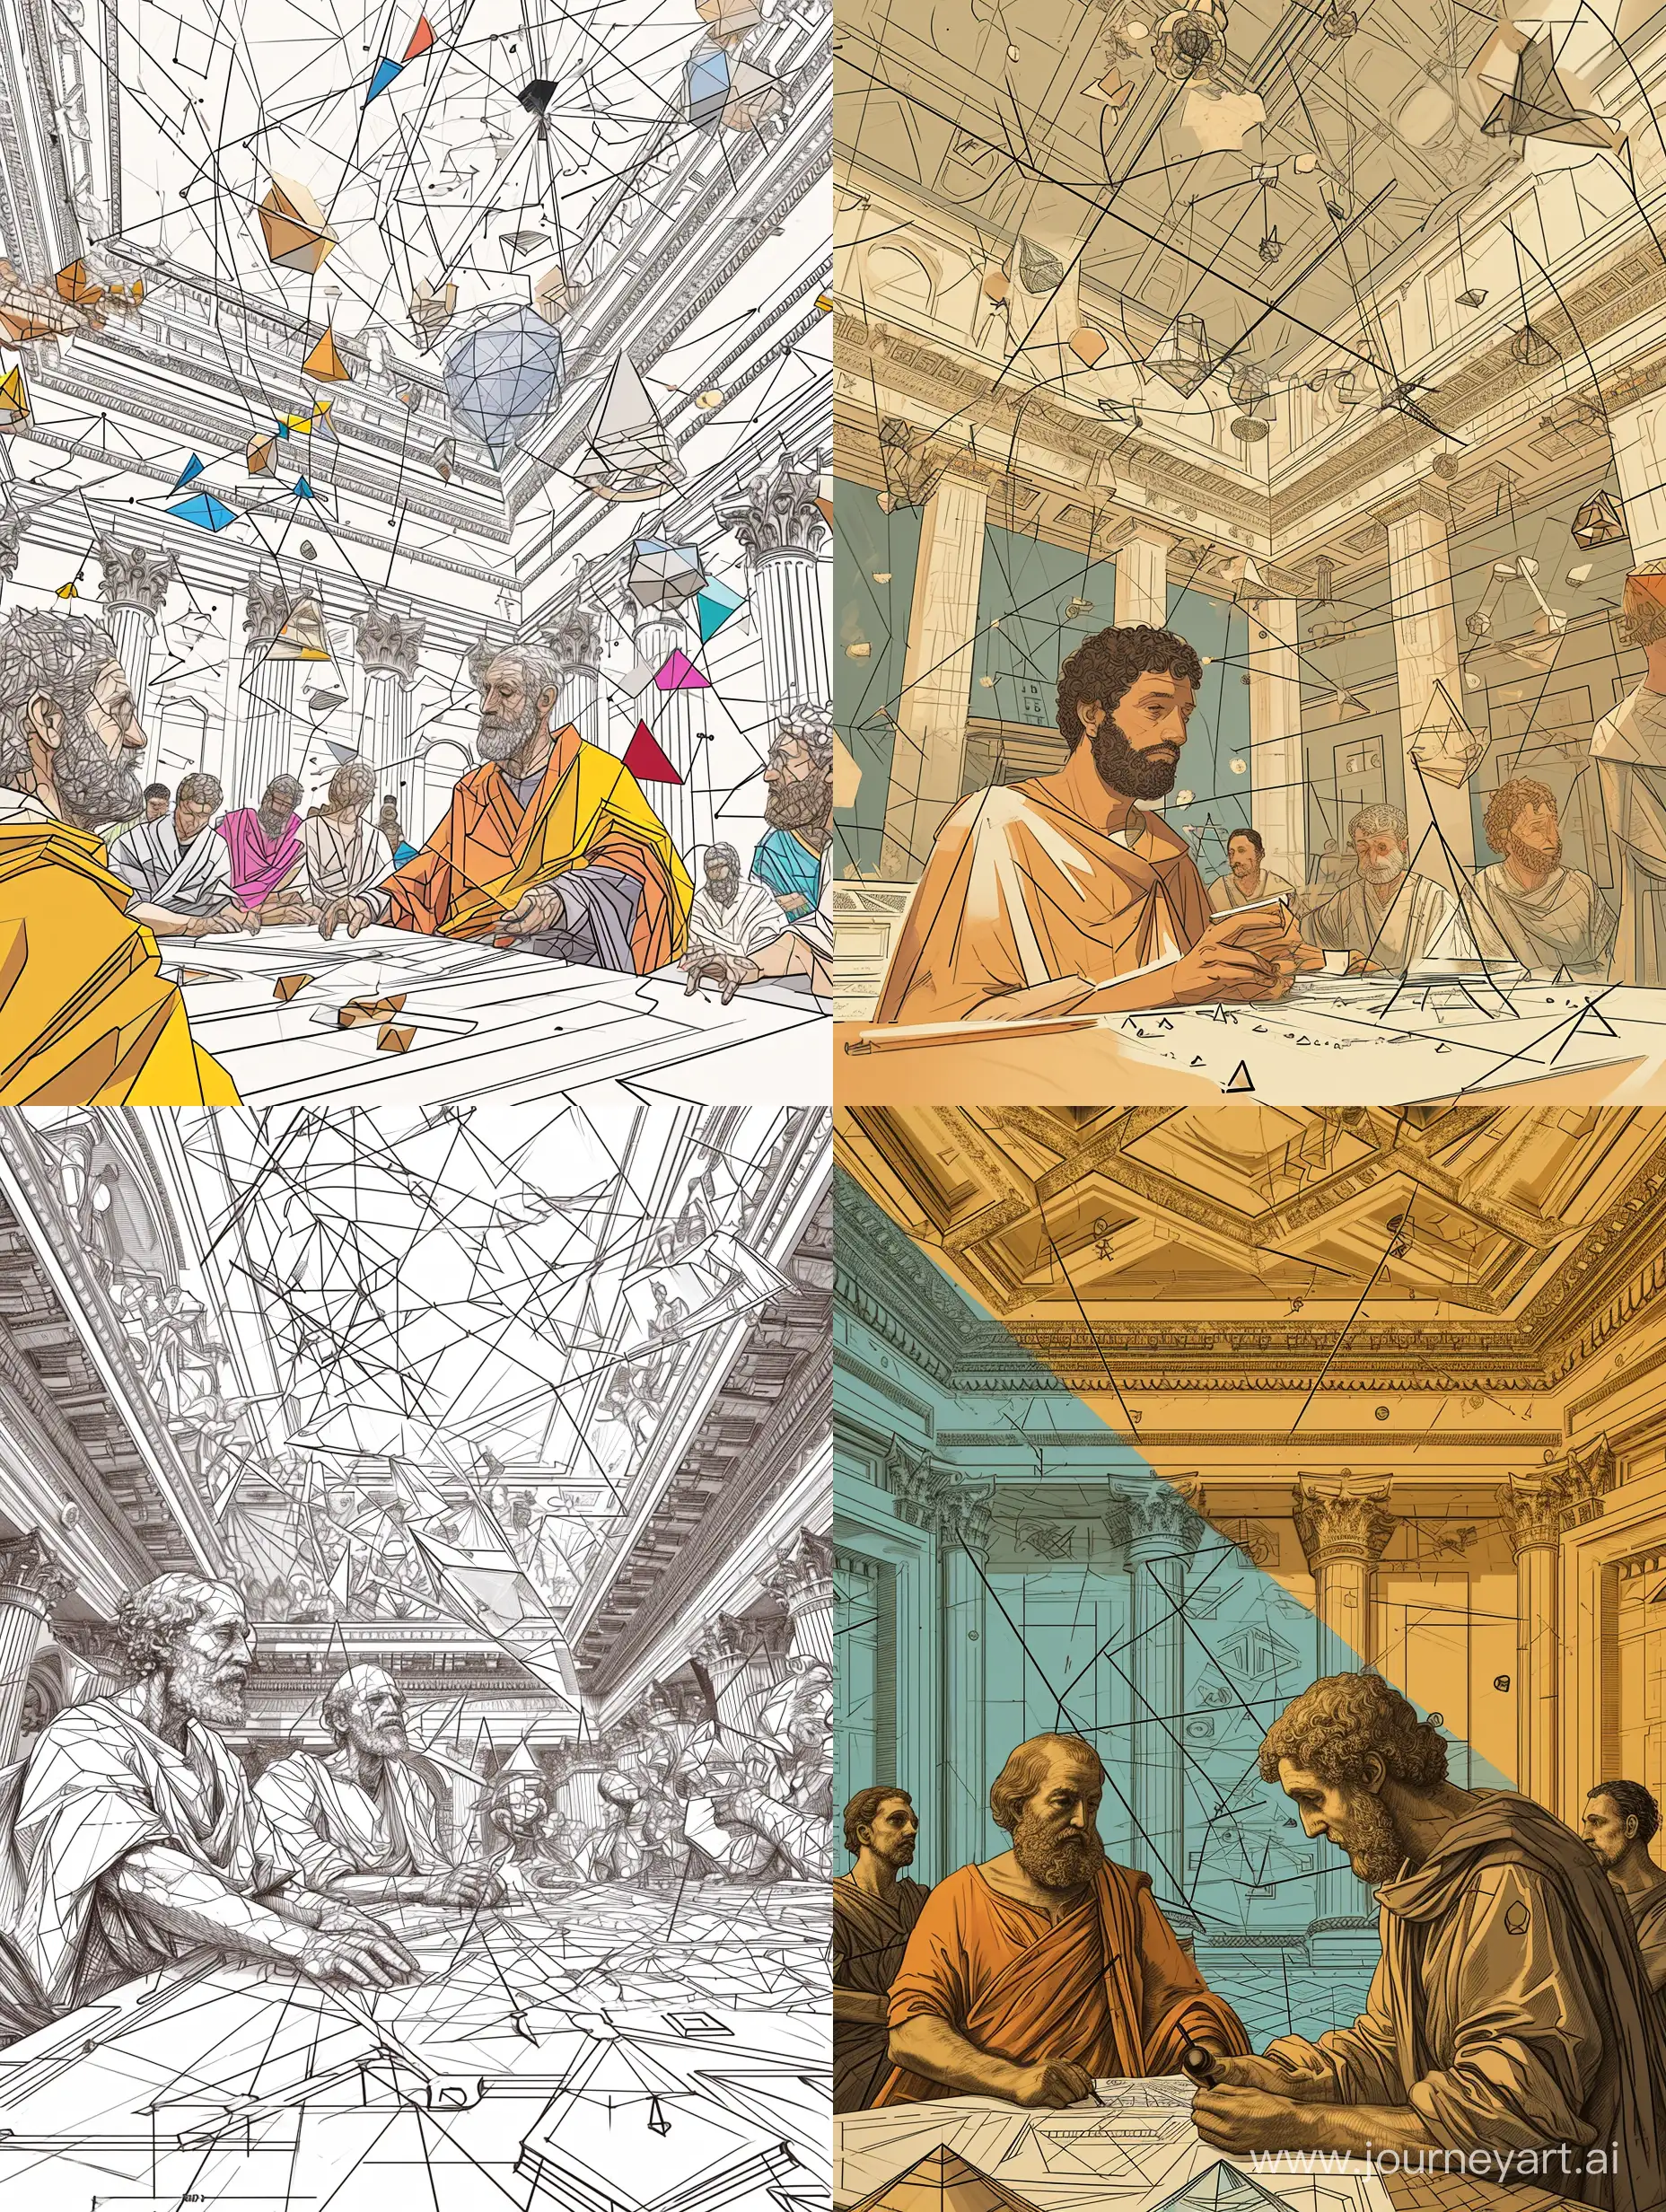 Generate a visually striking scene, depicting Euclid instructing peers in Euclidean Geometry within a Baroque building. Employ thin black lines in the Raphael style . Euclid should be rendered adopting a Raphaelite style as he examines geometric figures. Zoom in on Euclid for emphasis. Populate the background and ceiling with diverse geometric elements such as triangles, squares, theorems, circles.